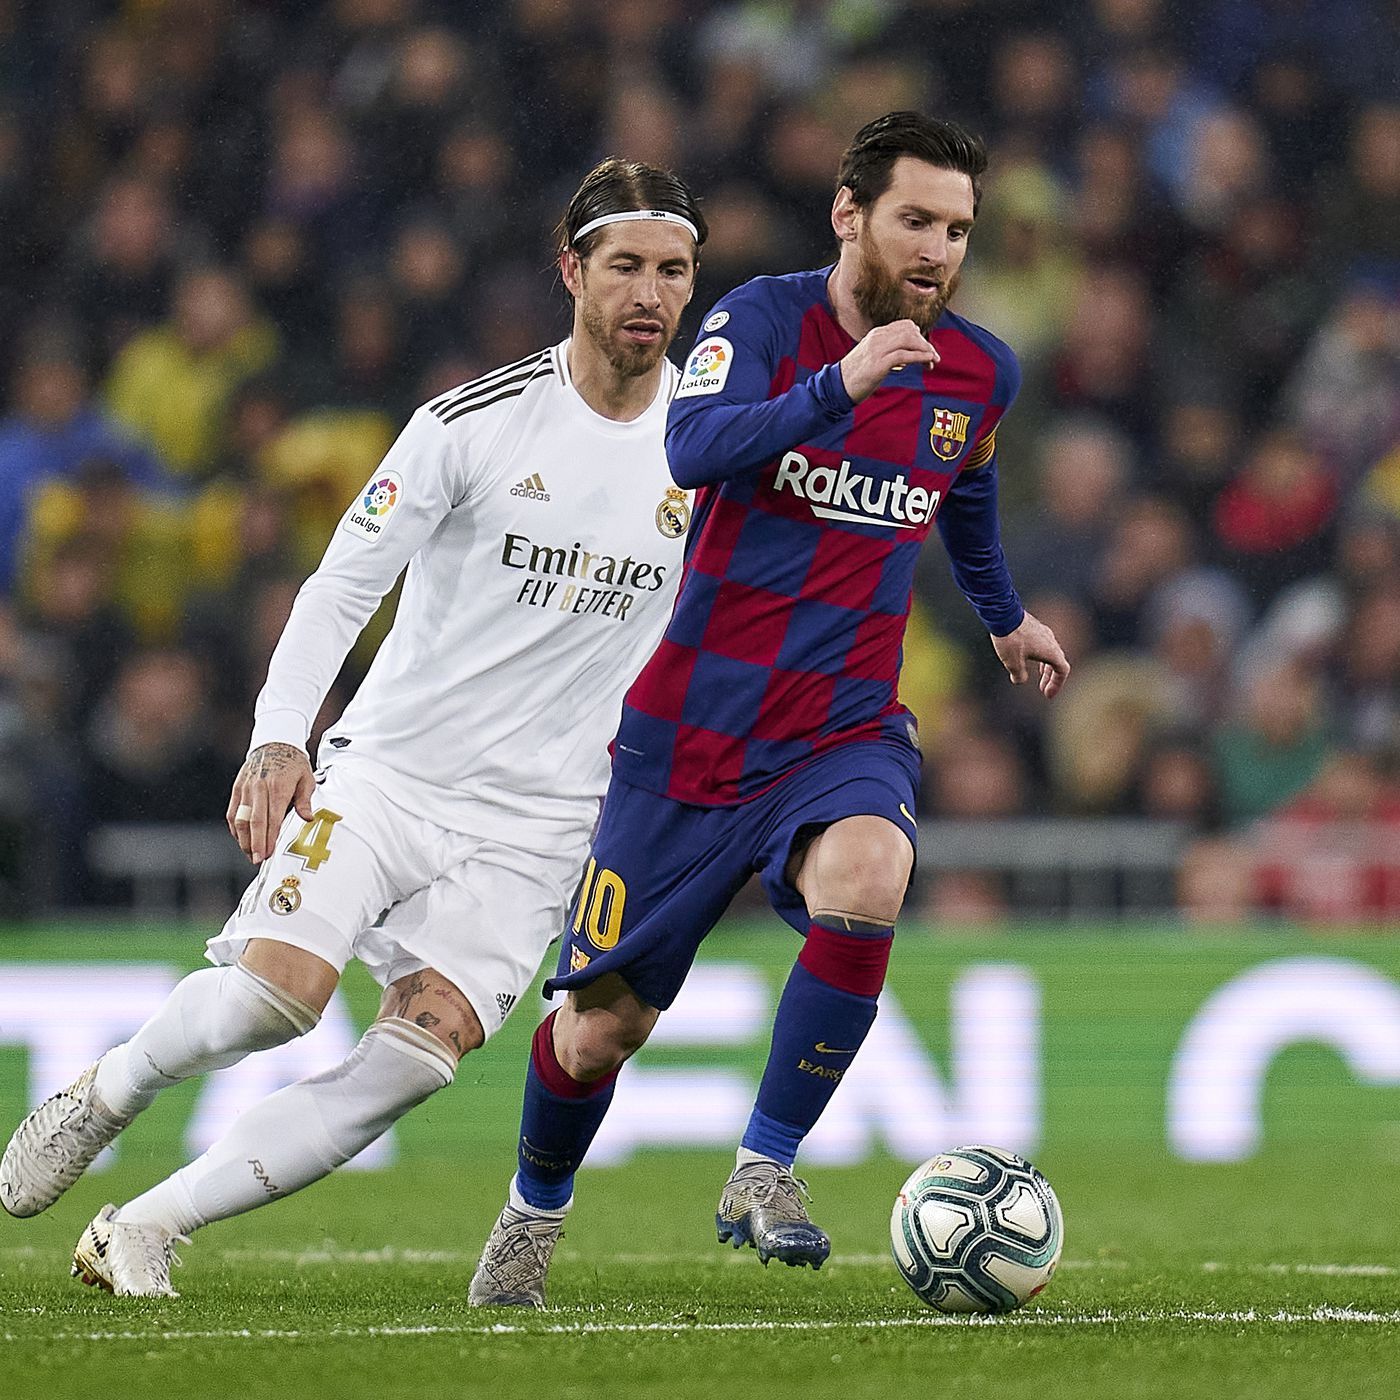 Sergio Ramos wants Lionel Messi to stay at Barcelona for 'the Spanish game and the rest of us'